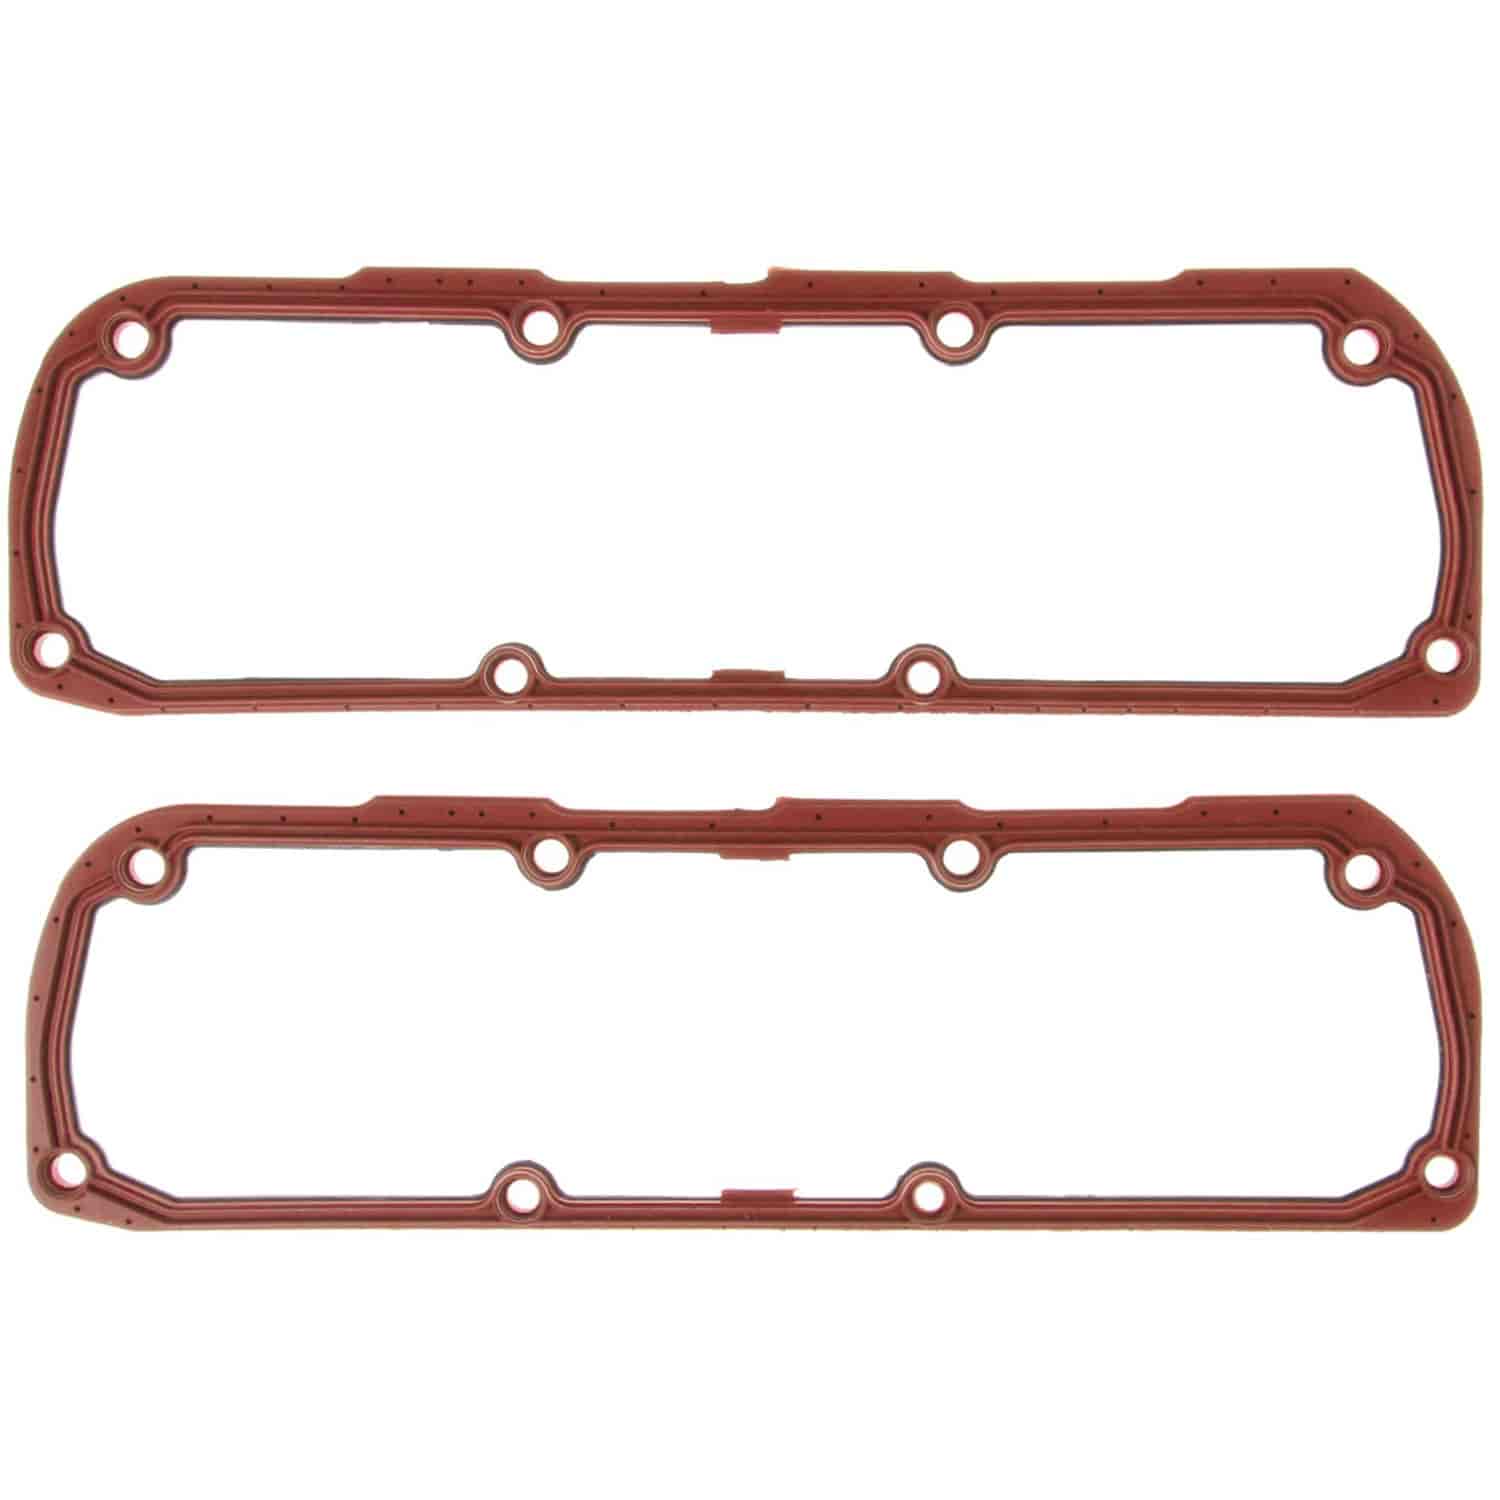 Valve Cover Set Chrysler Products 3.3L 201 1998-2000. Caravan Town & Country and Voyag